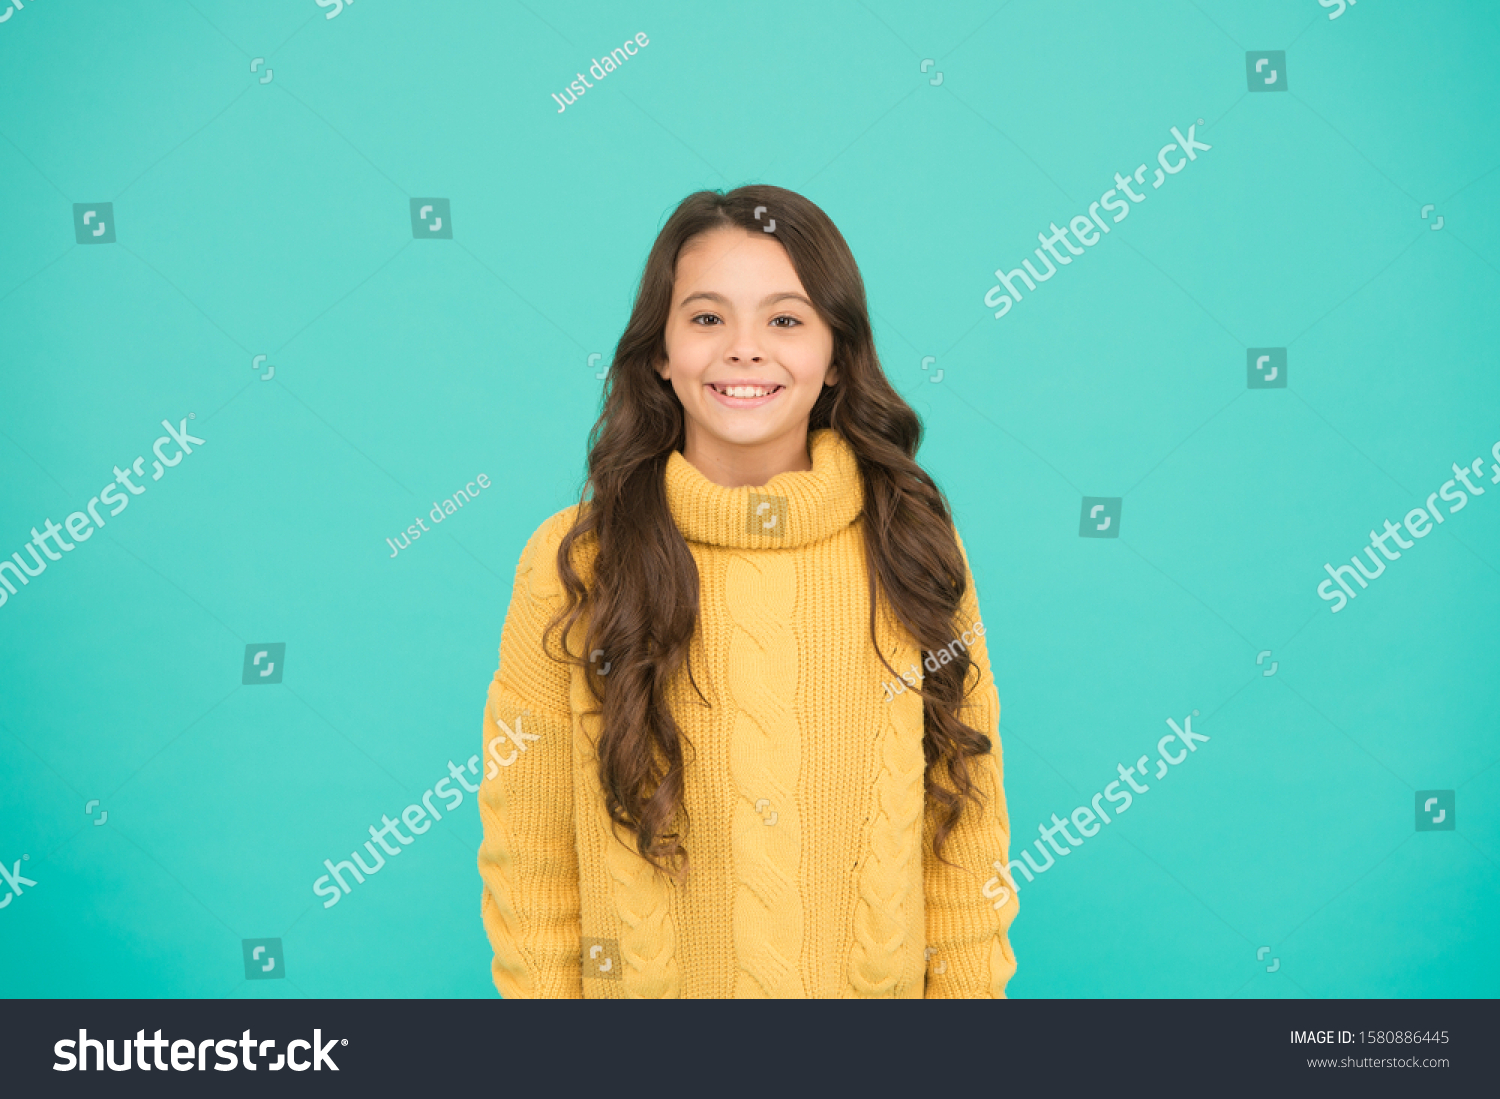 Positivity concept. Good vibes. Emotional baby. Positive child. Positive attitude to life. Inspiration. Positive mood. Kids psychology. Adorable smiling girl wear yellow sweater turquoise background. #1580886445